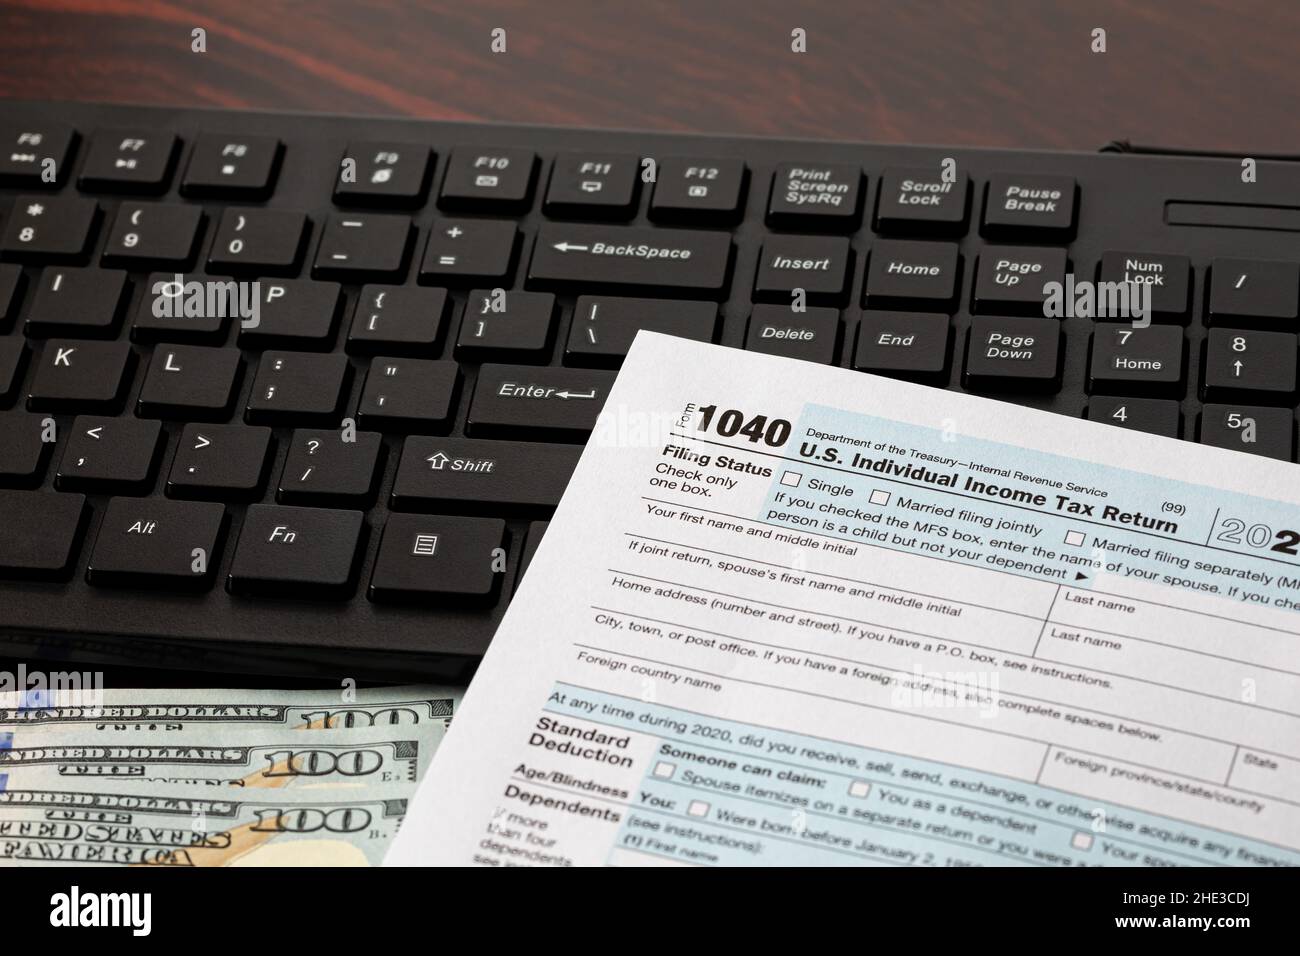 Income tax return and computer keyboard. Online filing, tax software and e-file concept. Stock Photo